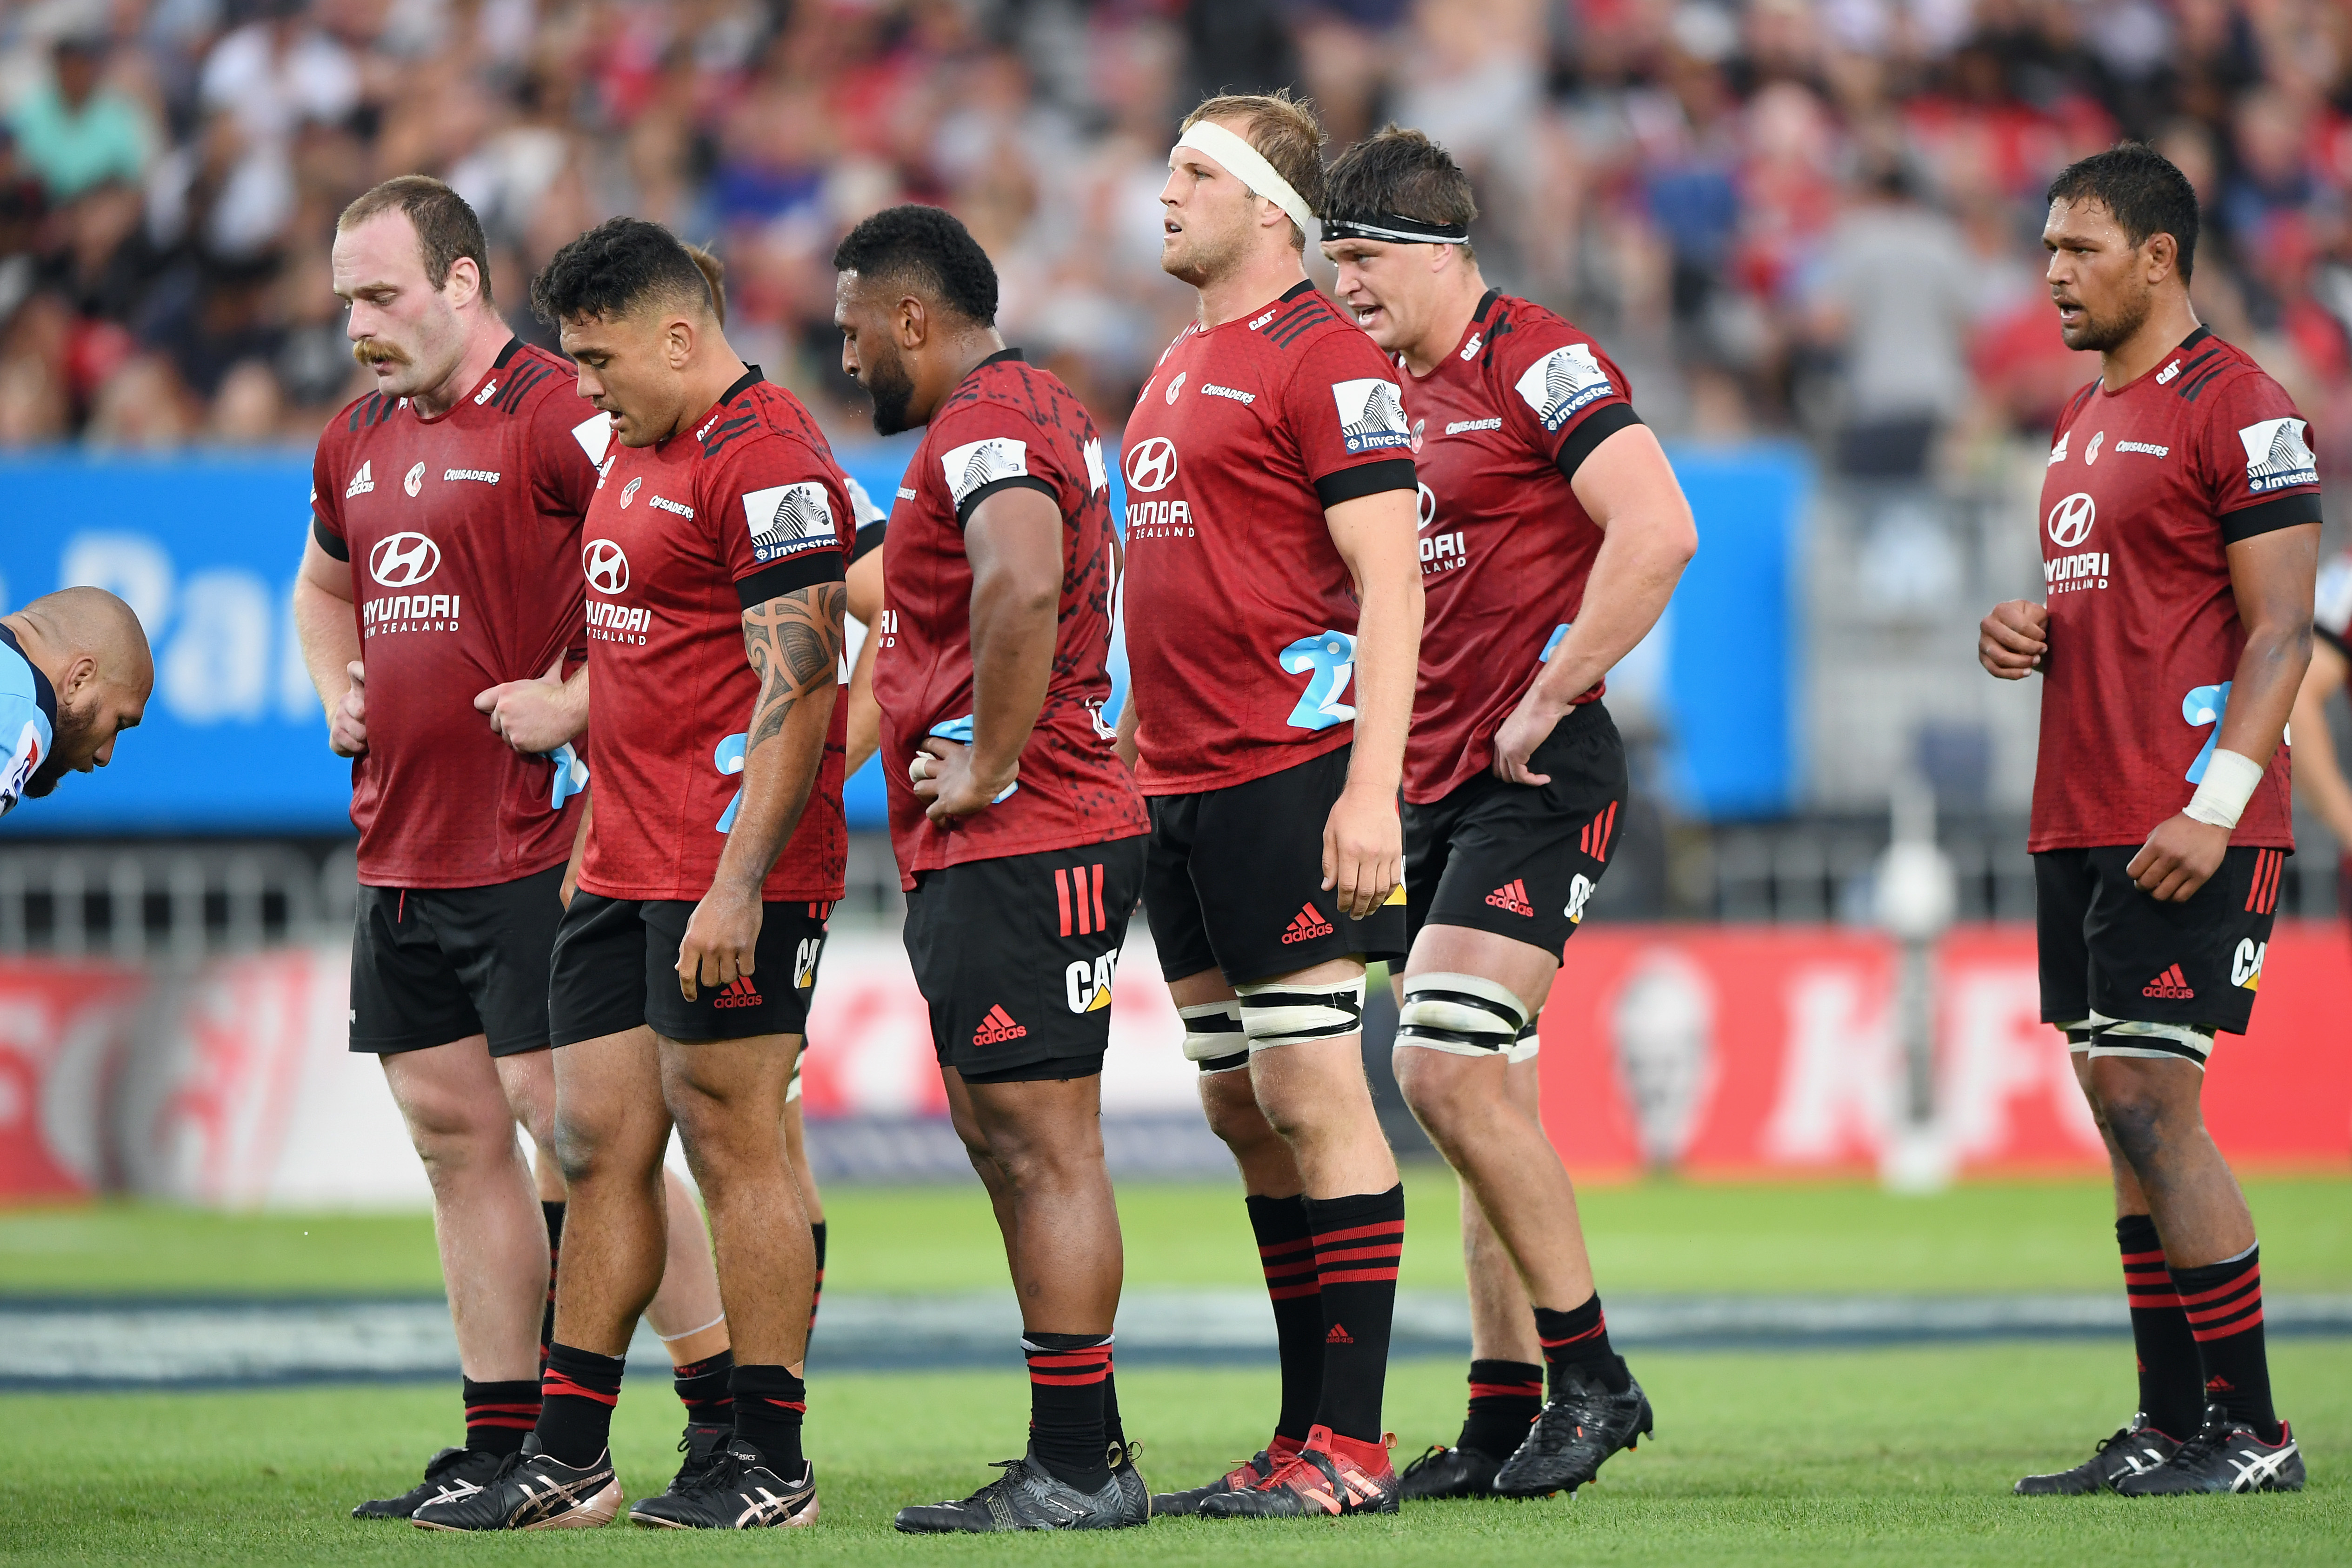 Oliver Jager (left) will make his third consecutive start at tighthead prop for the Crusaders....